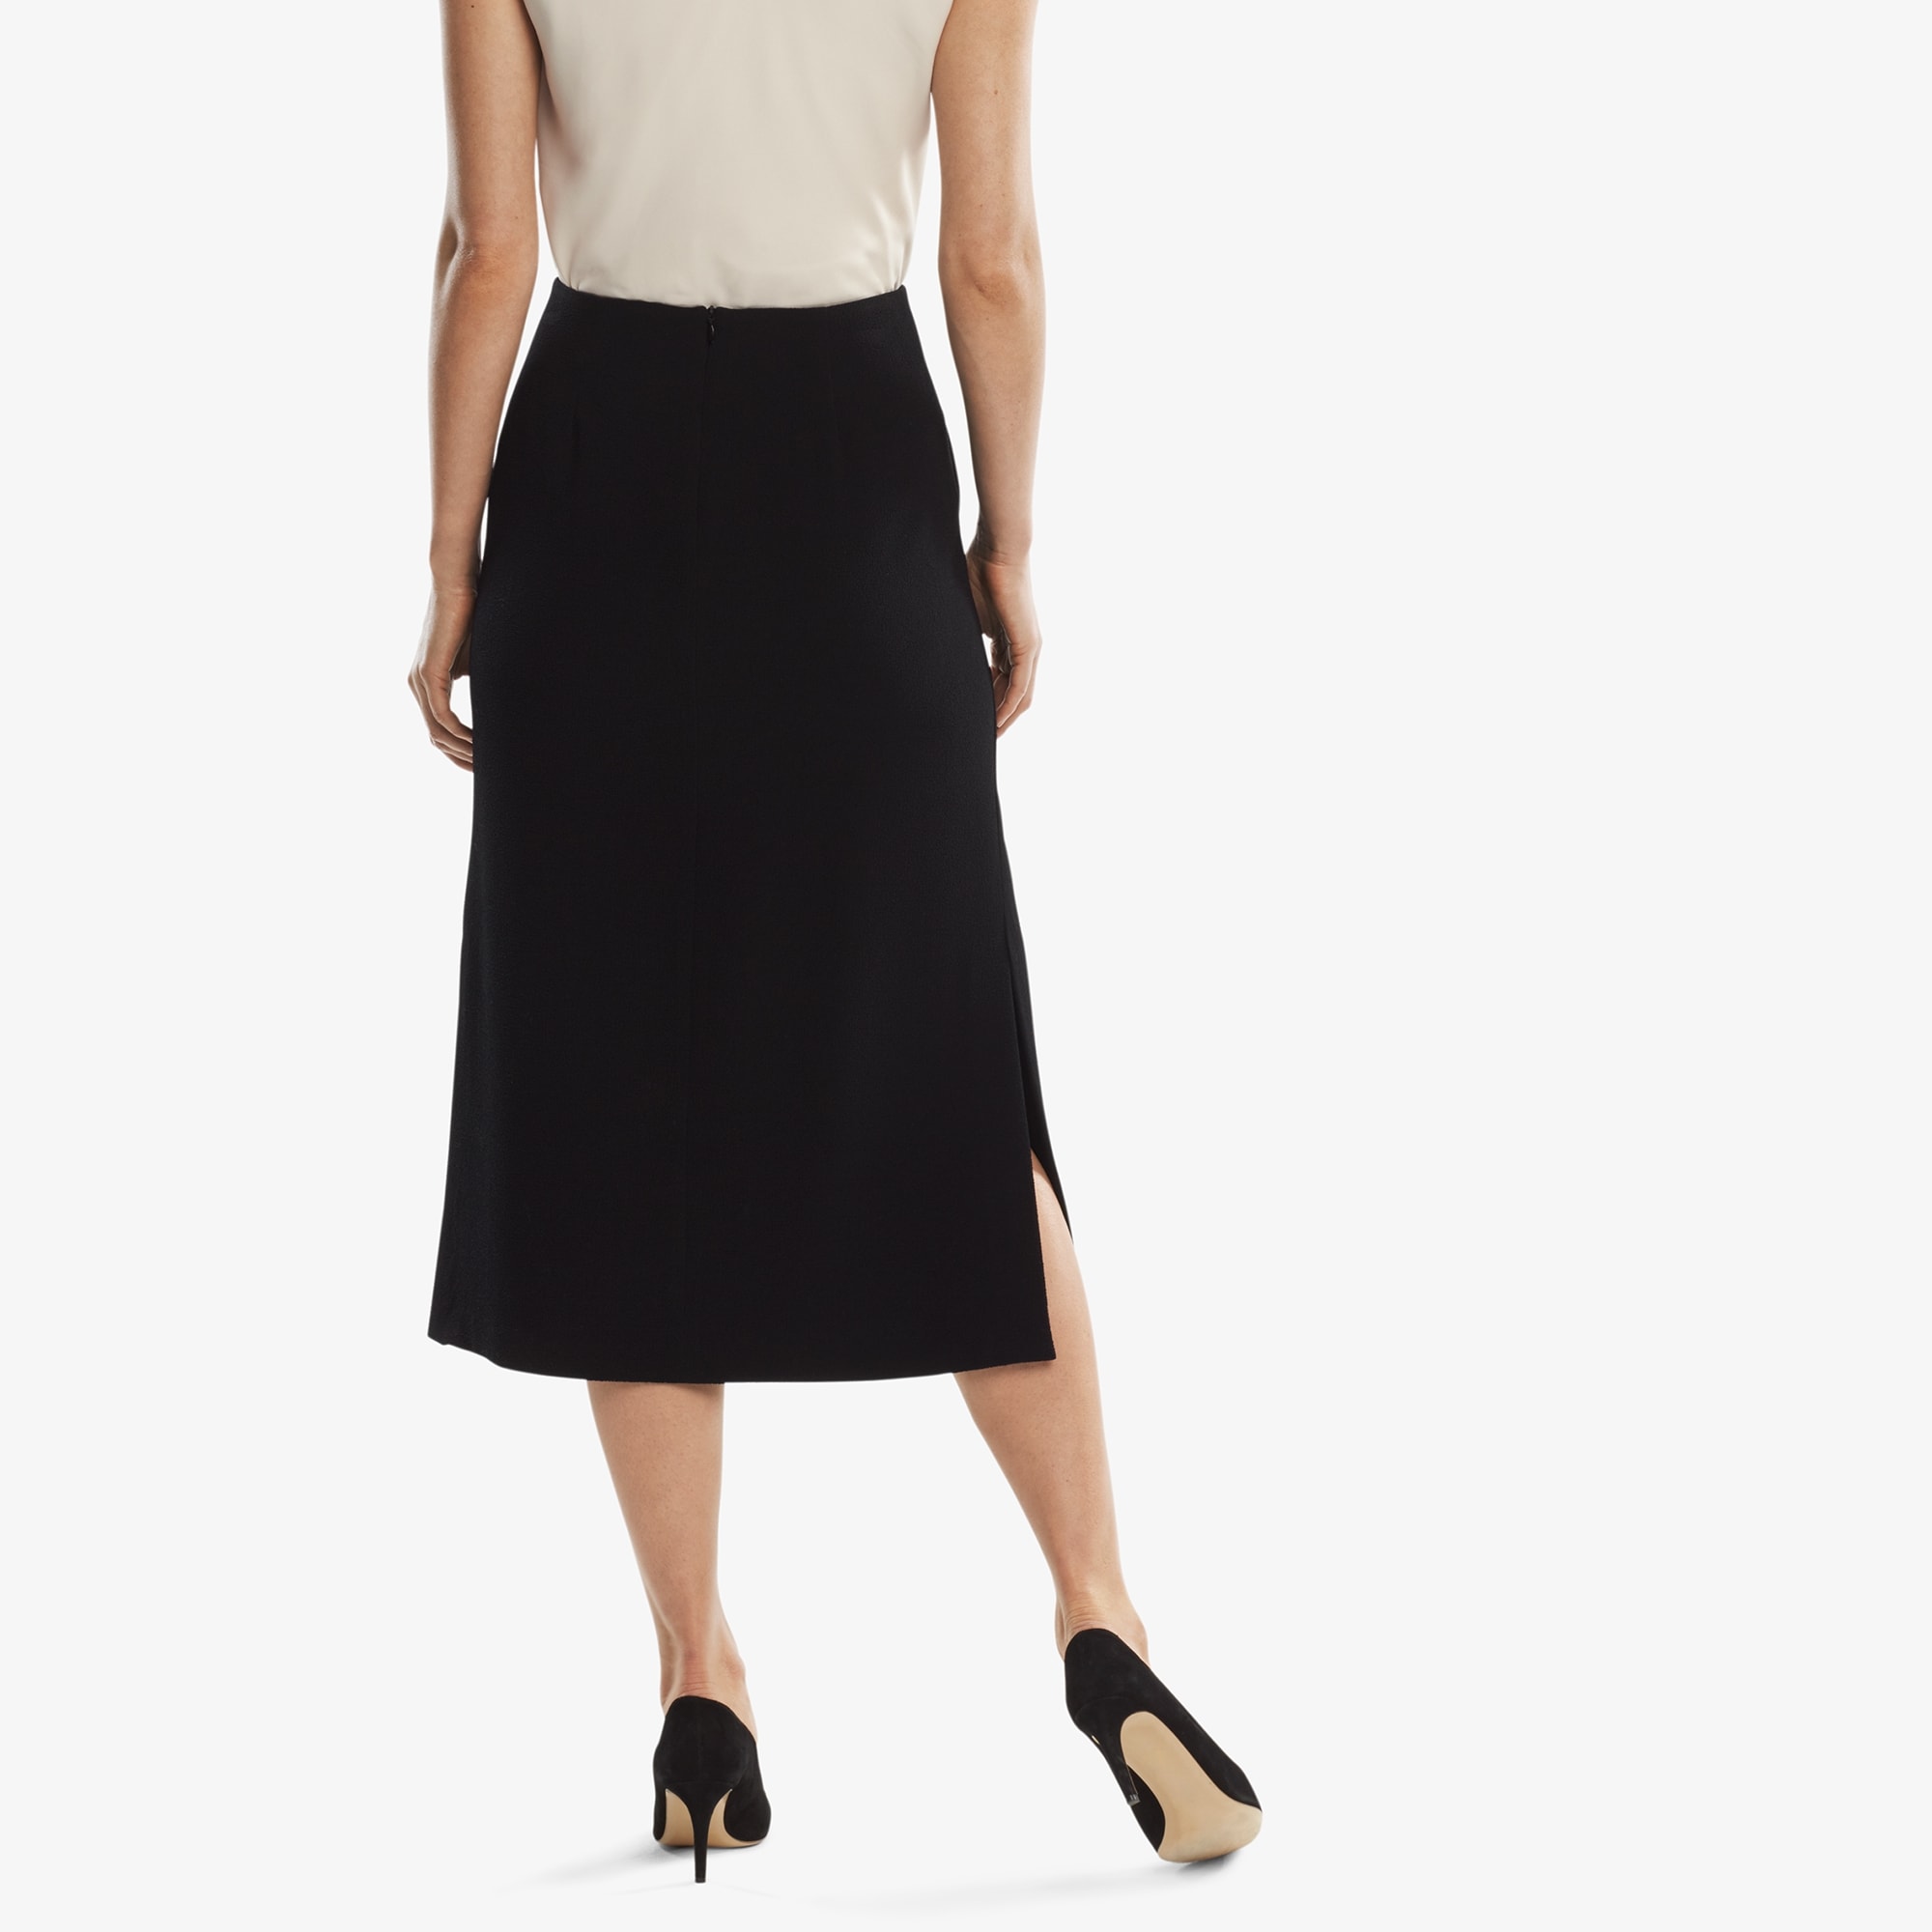 The Willoughby Skirt—Staccato - Black | M.M.LaFleur